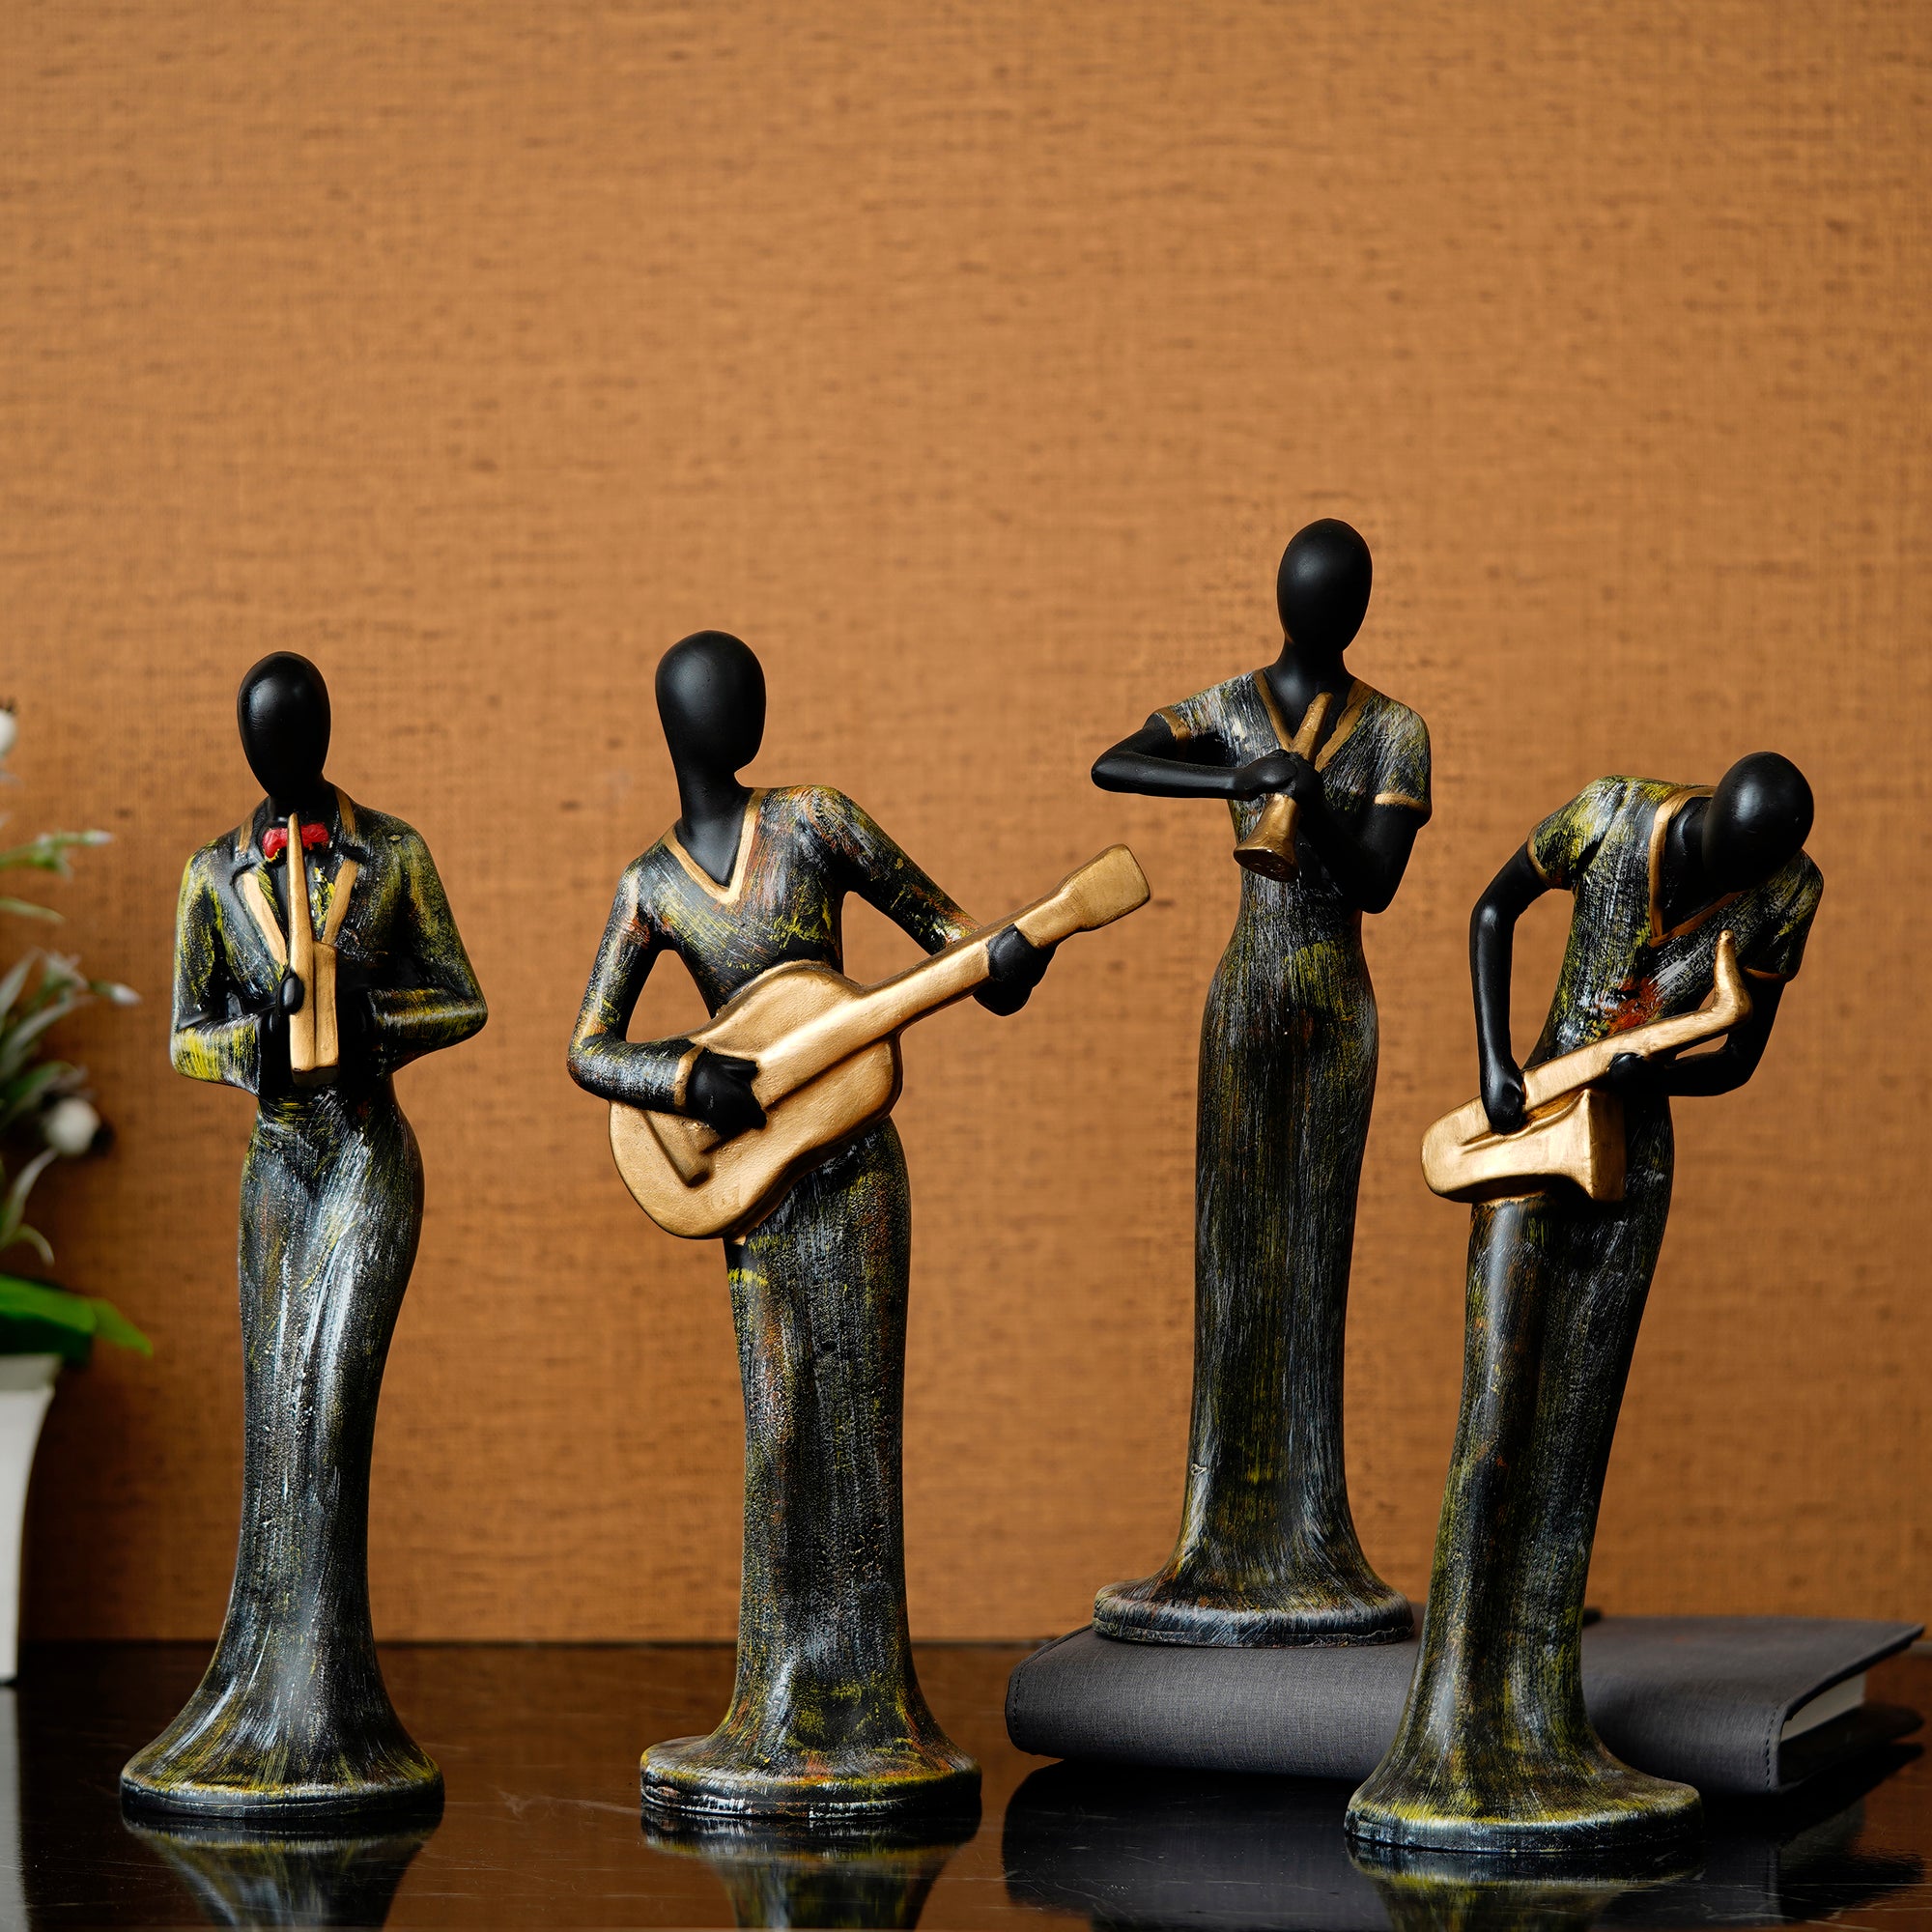 Grey and Black Polyresin Set of 4 Ladies figurines Playing Clarinet, Guitar, Wind, Saxophone Musical Instrument Handcrafted Decorative Showpiece